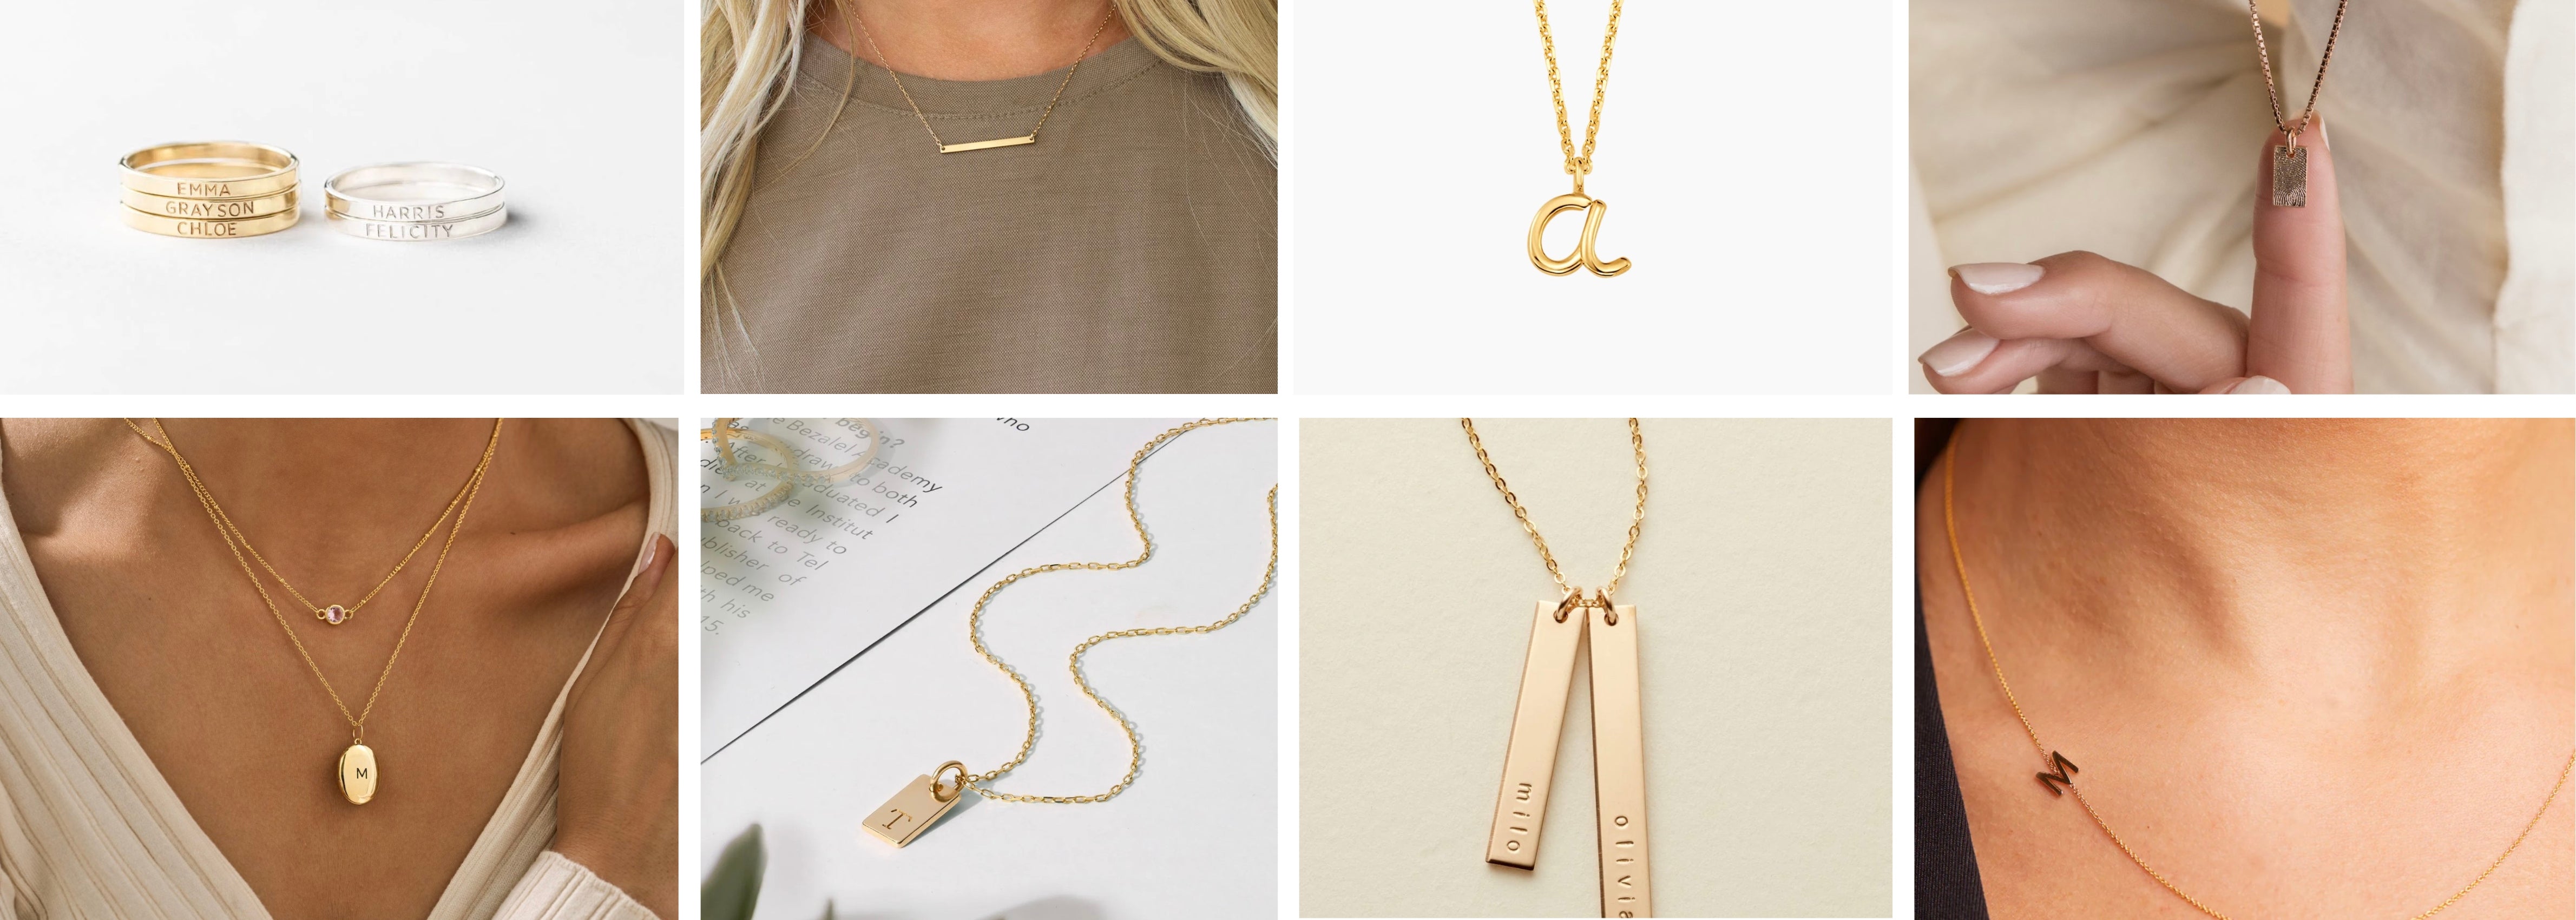 The Non Cheesy Mom Jewelry You Can Actually Wear Everyday Guide (aka the Forward This To Team Family So They Can "Pick Out The Perfect Gift" Guide)